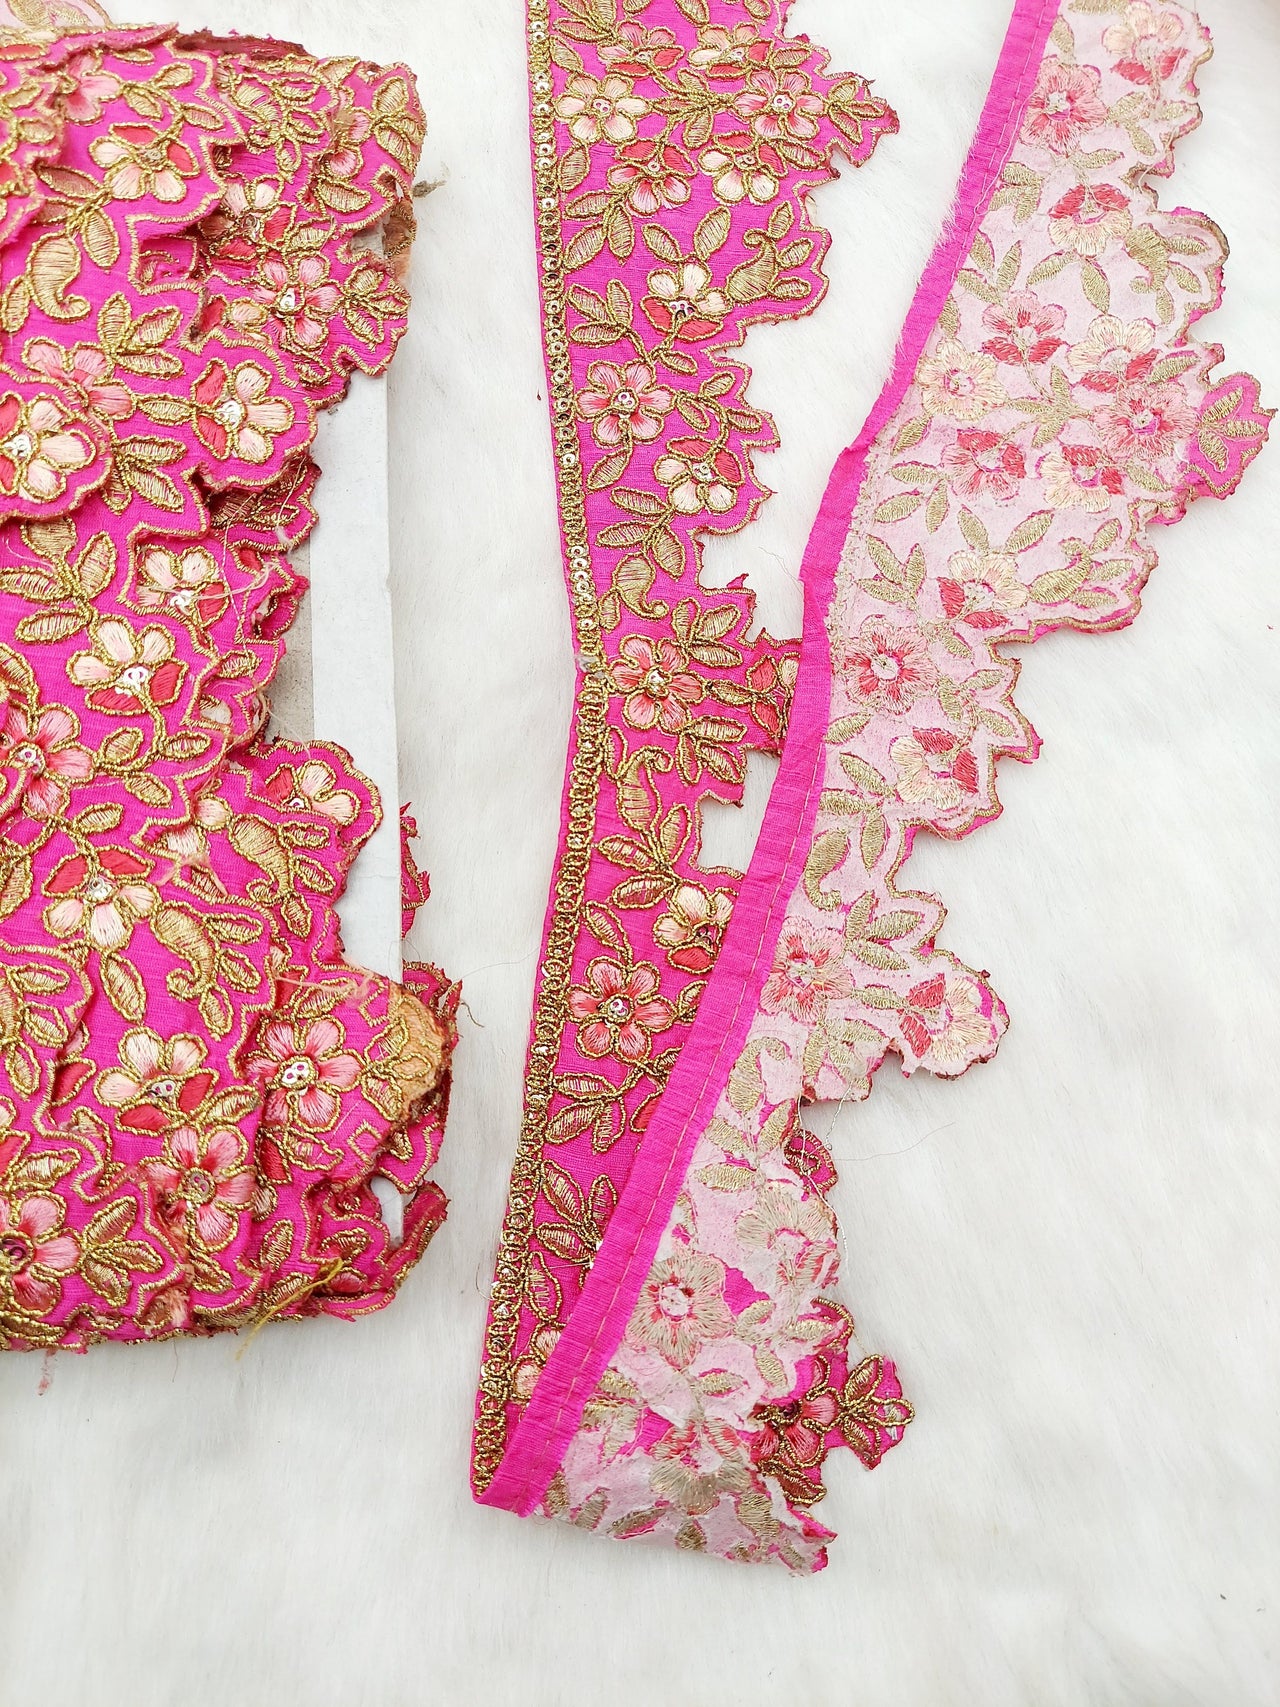 Hand Embroidered Cutwork Lace Trim In Gold Floral Embroidery, Sari Border, Trim by Yard